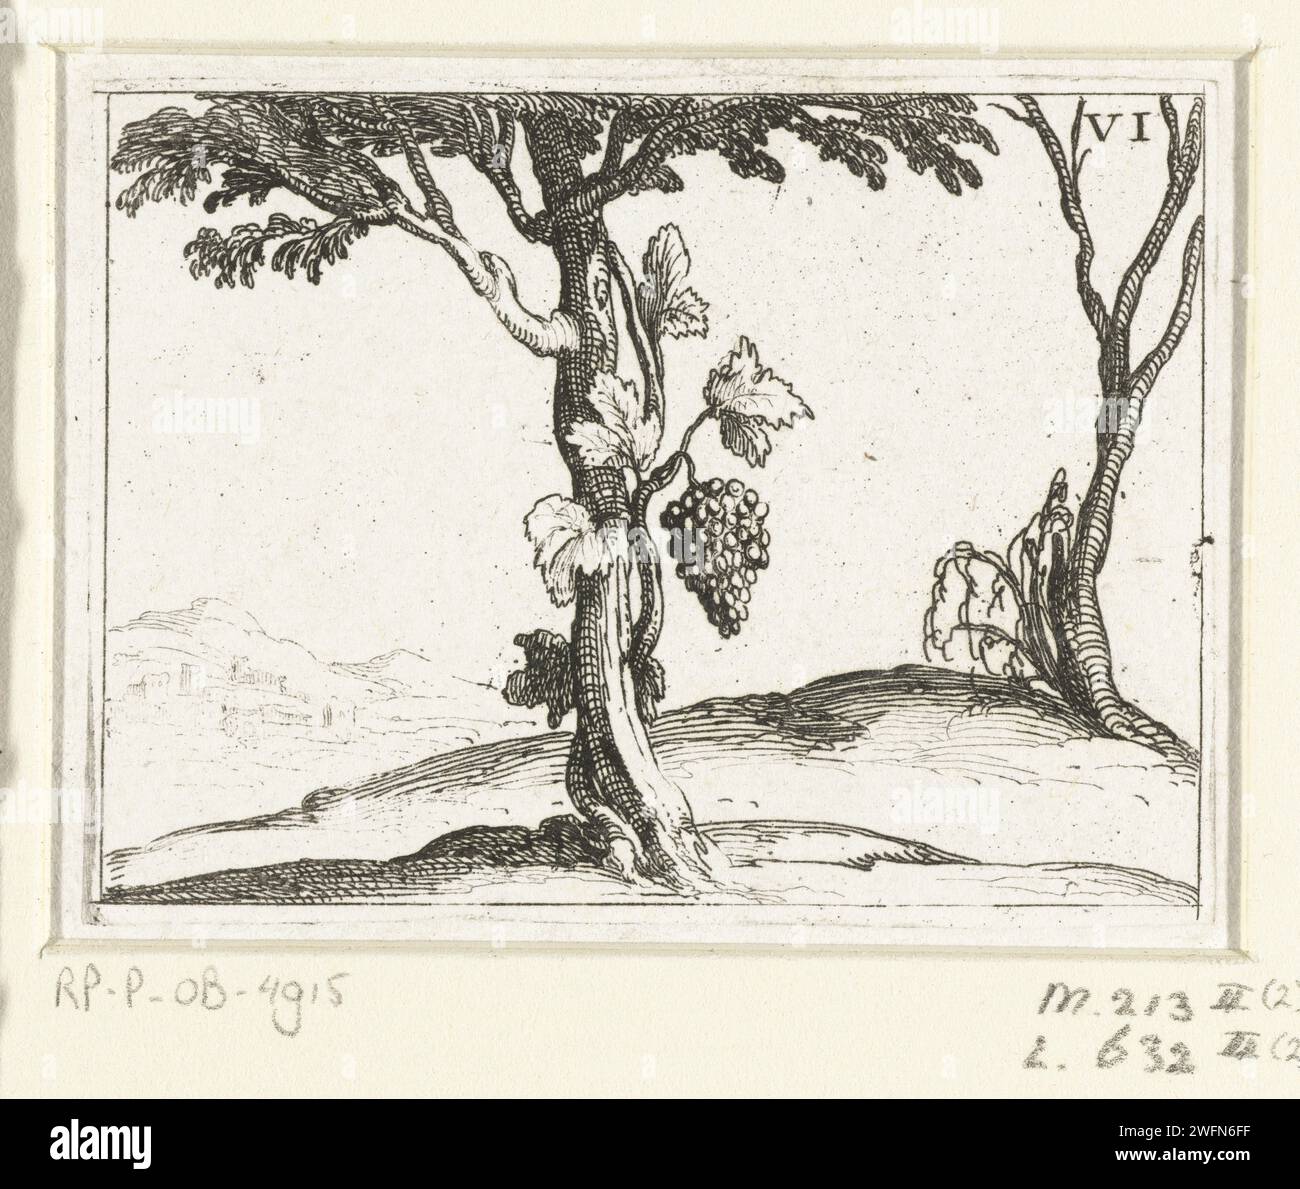 Wijnstok near a tree, Jacques Callot, 1646 print Presentation of a wine rank that winds around a tree. This magazine is part of the emblem series 'Life of Maria in Emblemen'. In addition to a title page and 26 emblems, the first state of this series also includes three blades with hymns on Maria in book print without image. print maker: Nancypublisher: Paris paper etching vine. bunch of grapes. trees Stock Photo